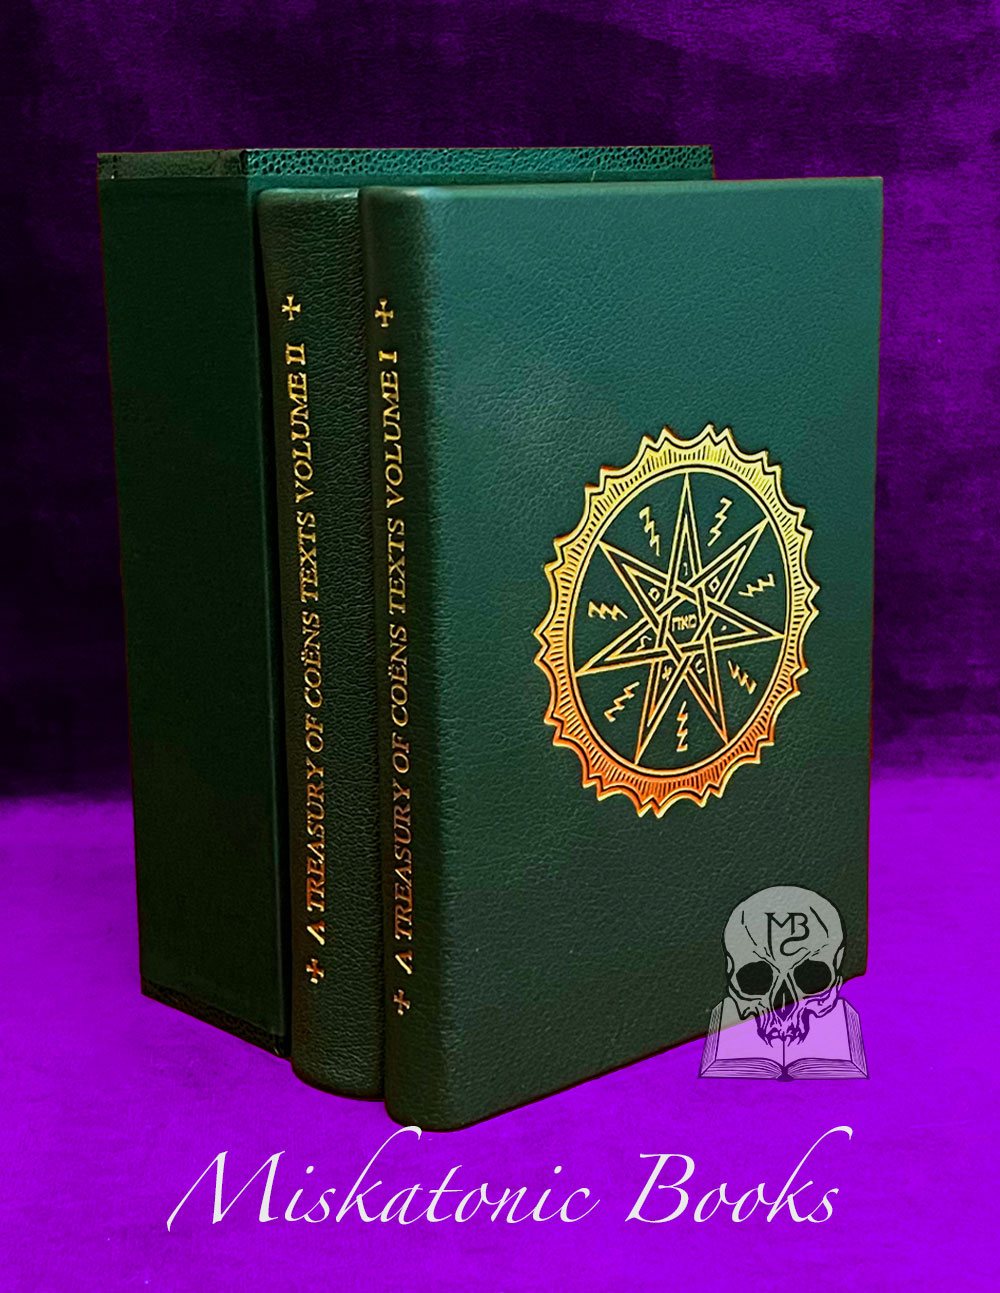 A TREASURY OF COËN TEXTS  IN TWO VOLUMES - DELUXE Limited Edition Bound in Full Leather and Cloth in Custom Slipcase